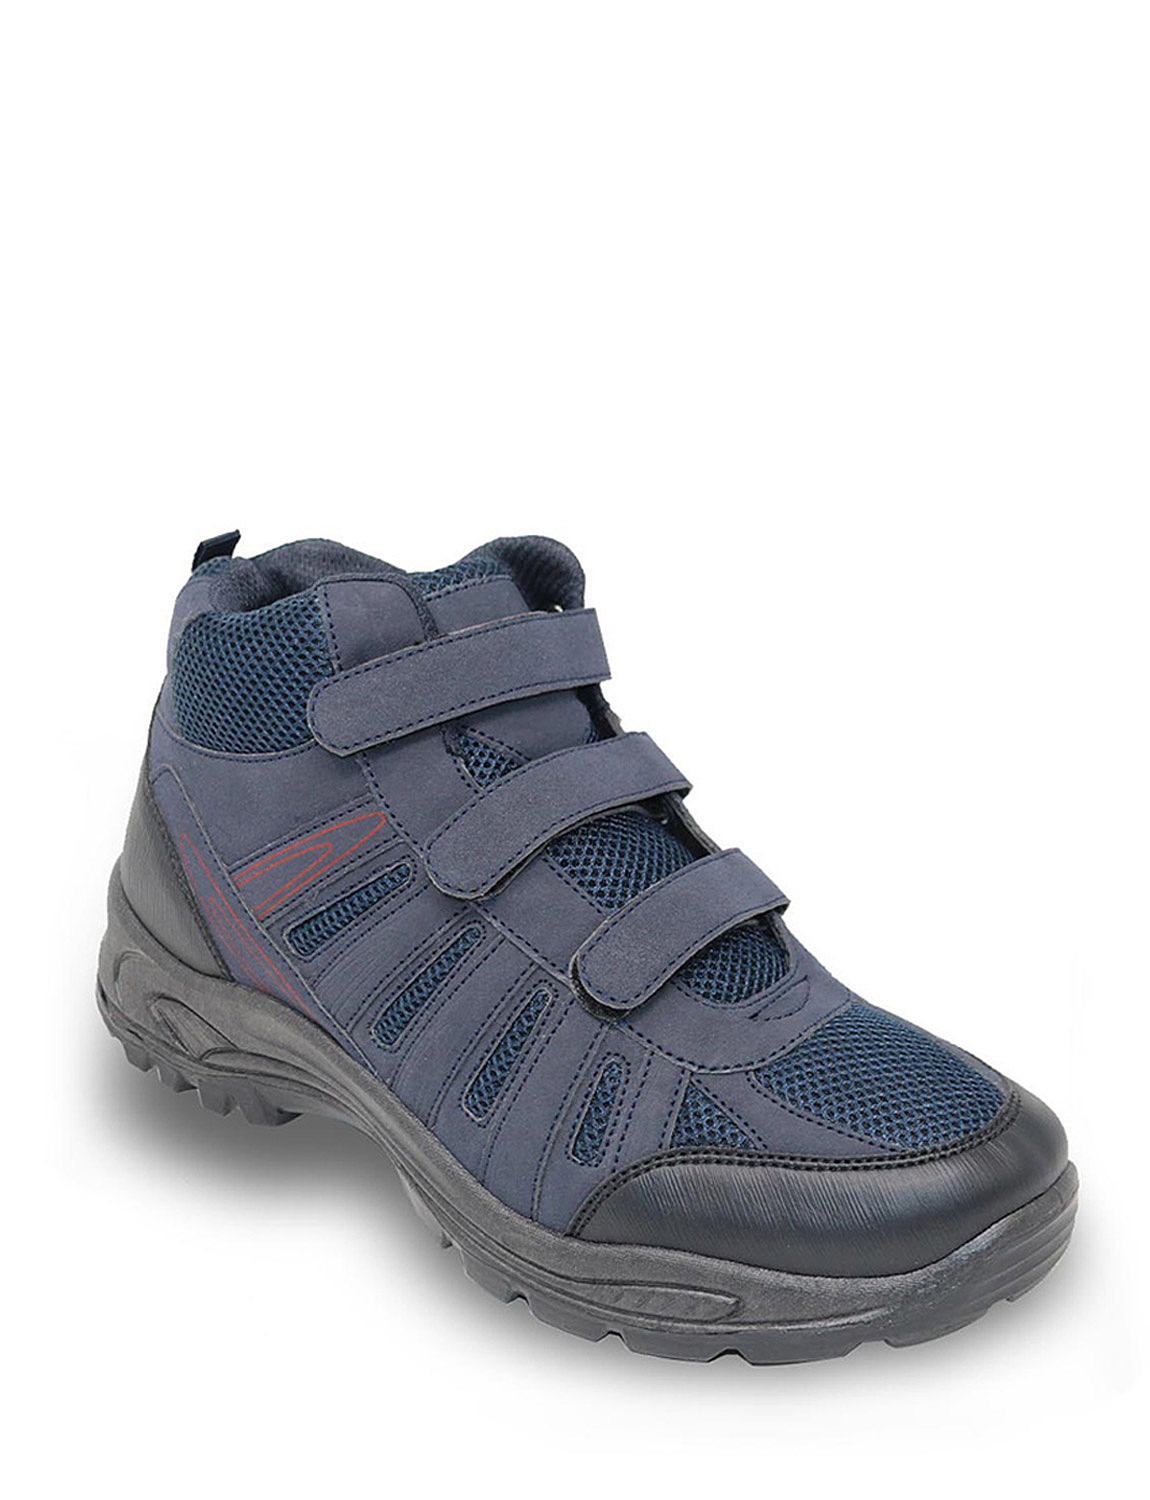 wide fitting hiking boots uk